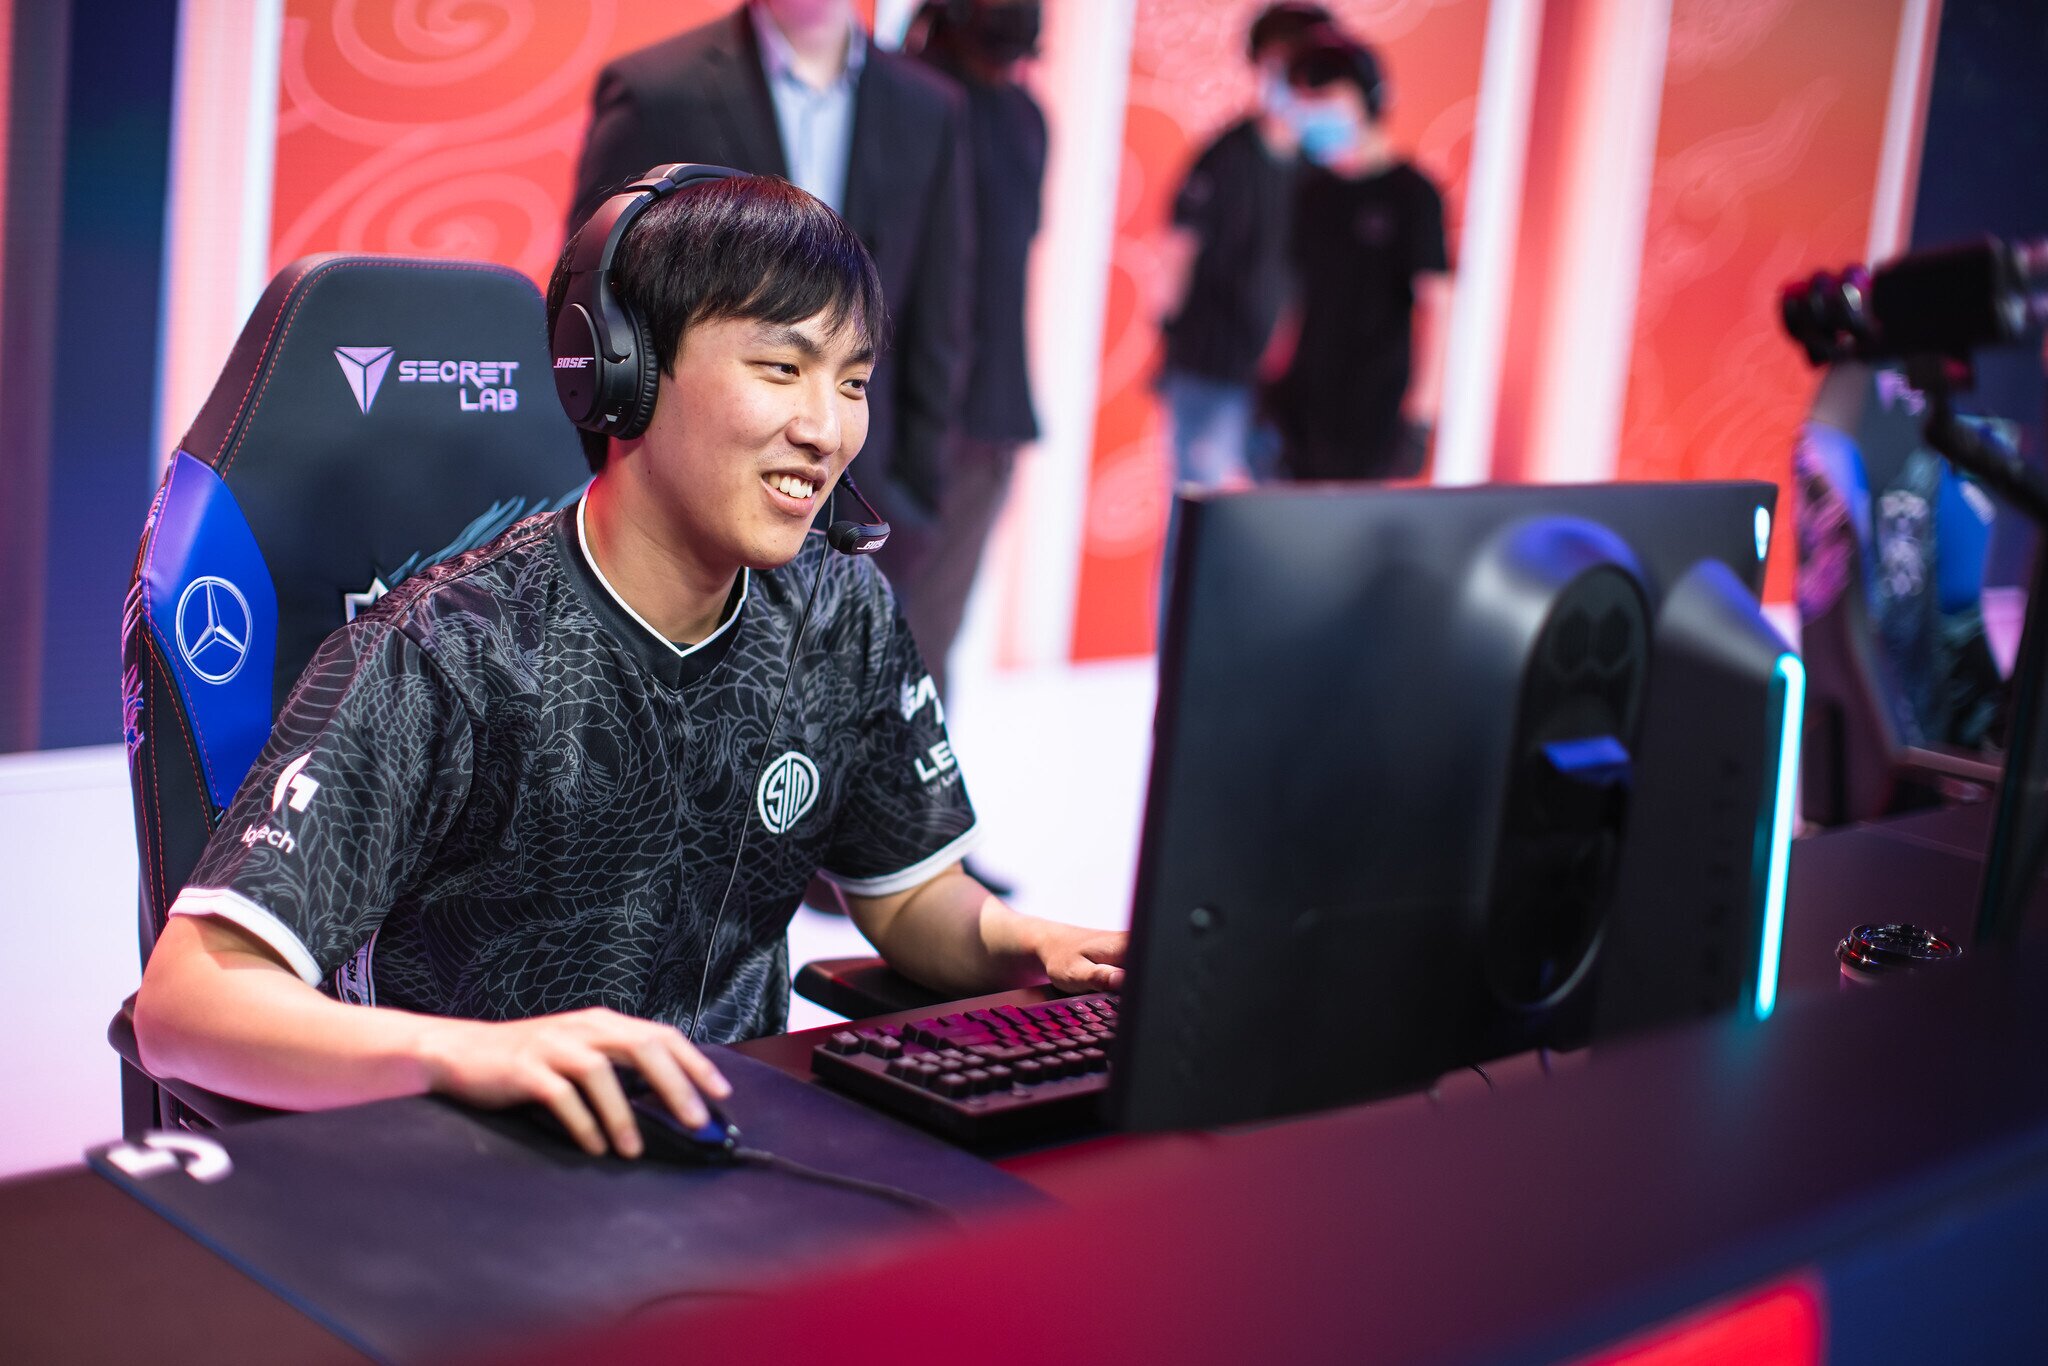 His Worlds 2020 appearance with TSM proved to be the last of the professional carre of Doublelift. (Photo via Yicun Liu